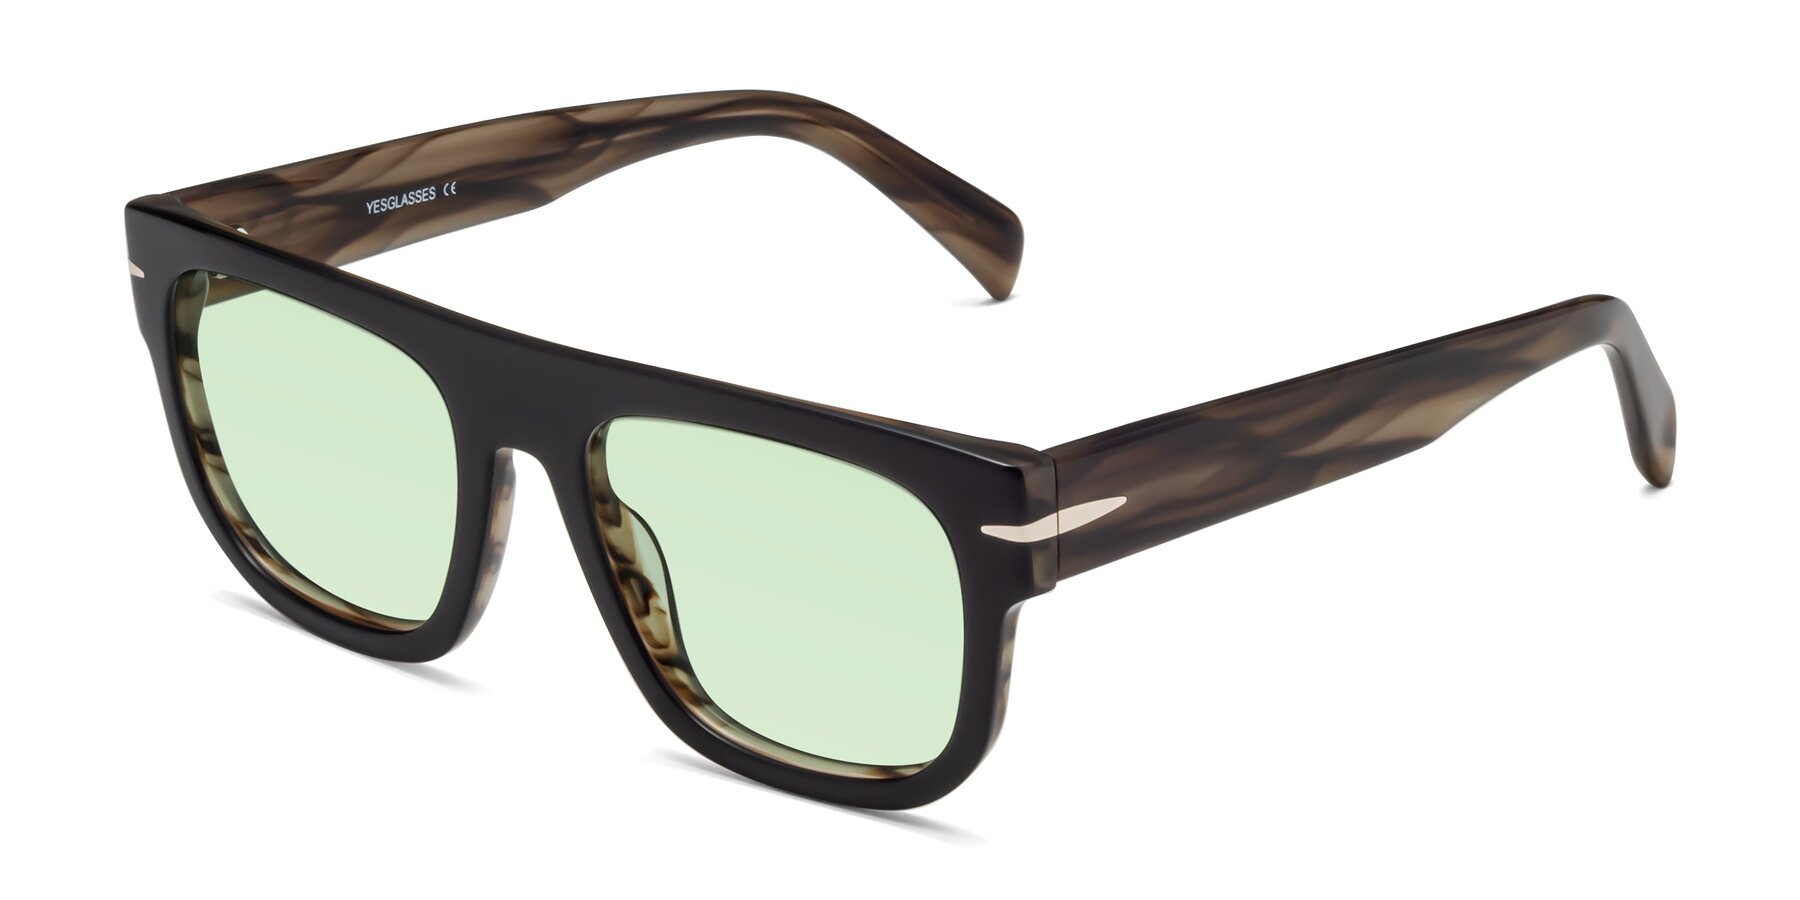 Angle of Campbell in Black-Stripe Brown with Light Green Tinted Lenses